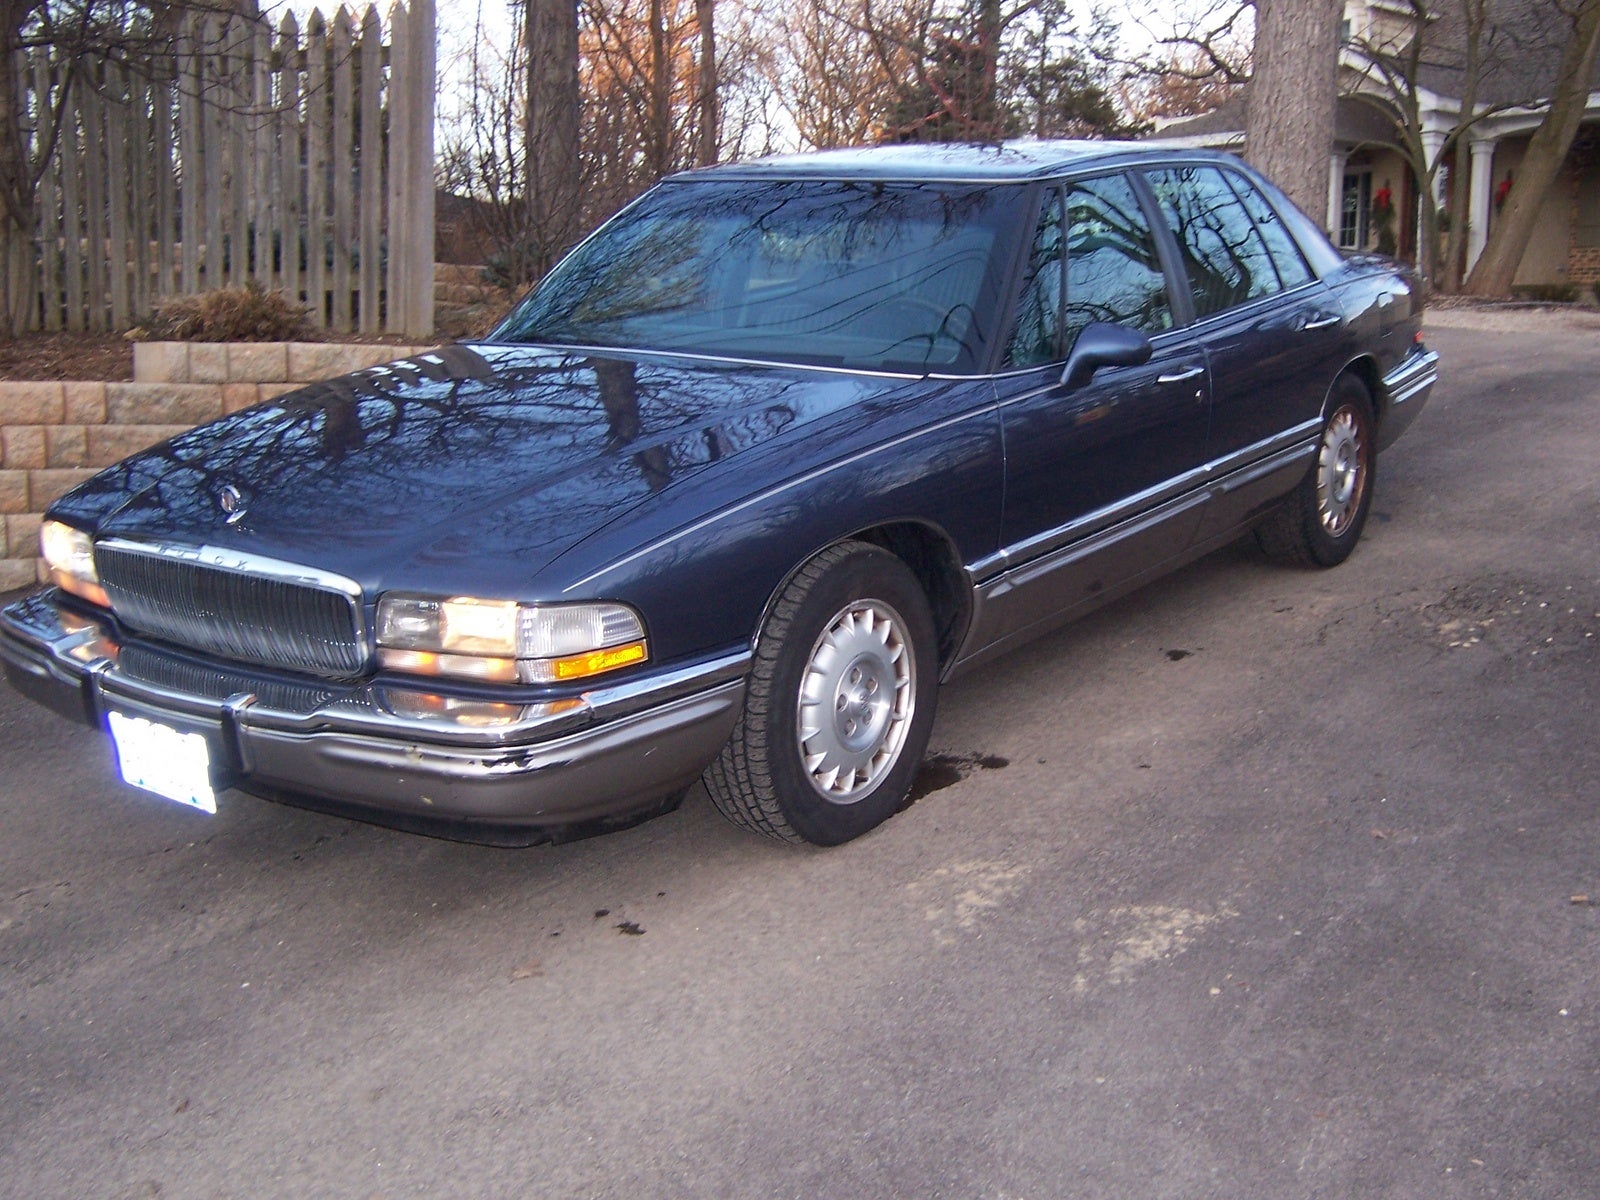 Picture of 1996 Buick Park Avenue 4 Dr Ultra Supercharged Sedan ...